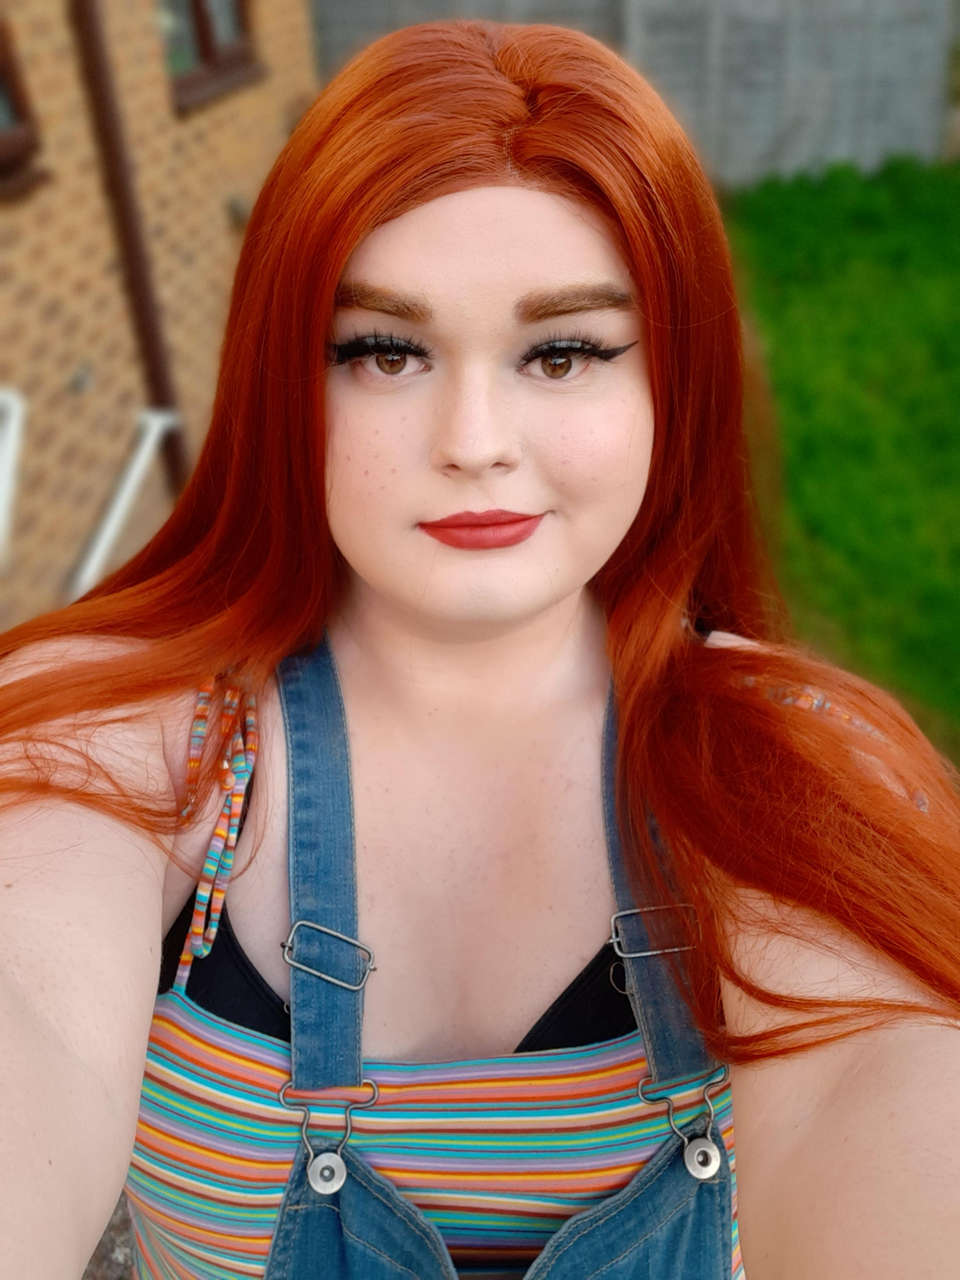 Lord Twinkles As Chucky Genderbent From Childs Play